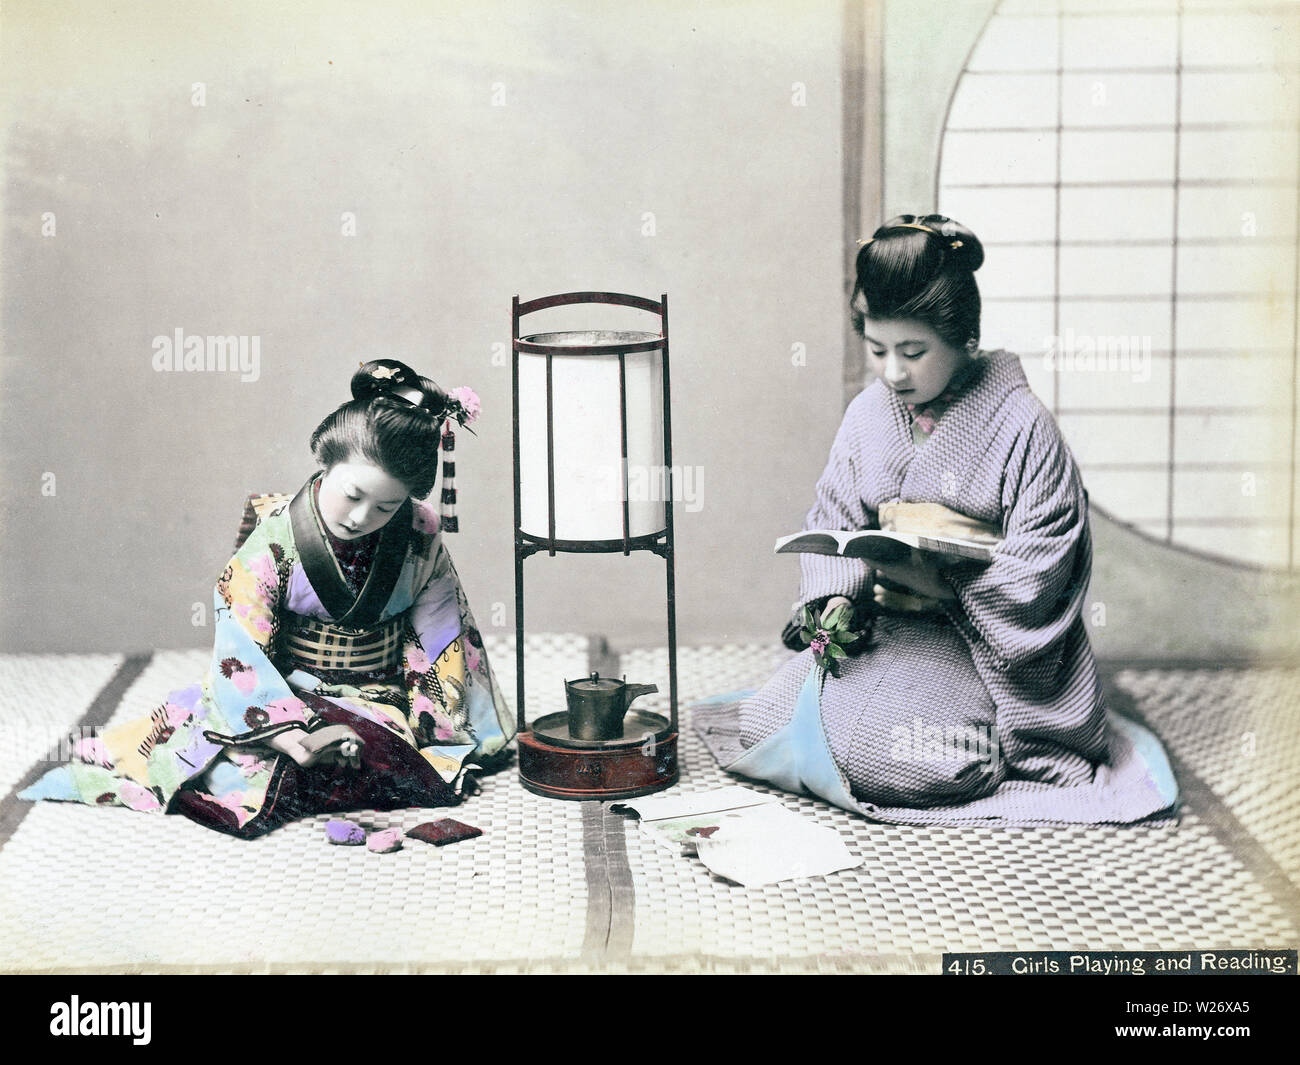 [ 1890s Japan - Japanese Women in Kimono ] —   Two women in kimono reading and playing. An andon lamps stands between them.  19th century vintage albumen photograph. Stock Photo